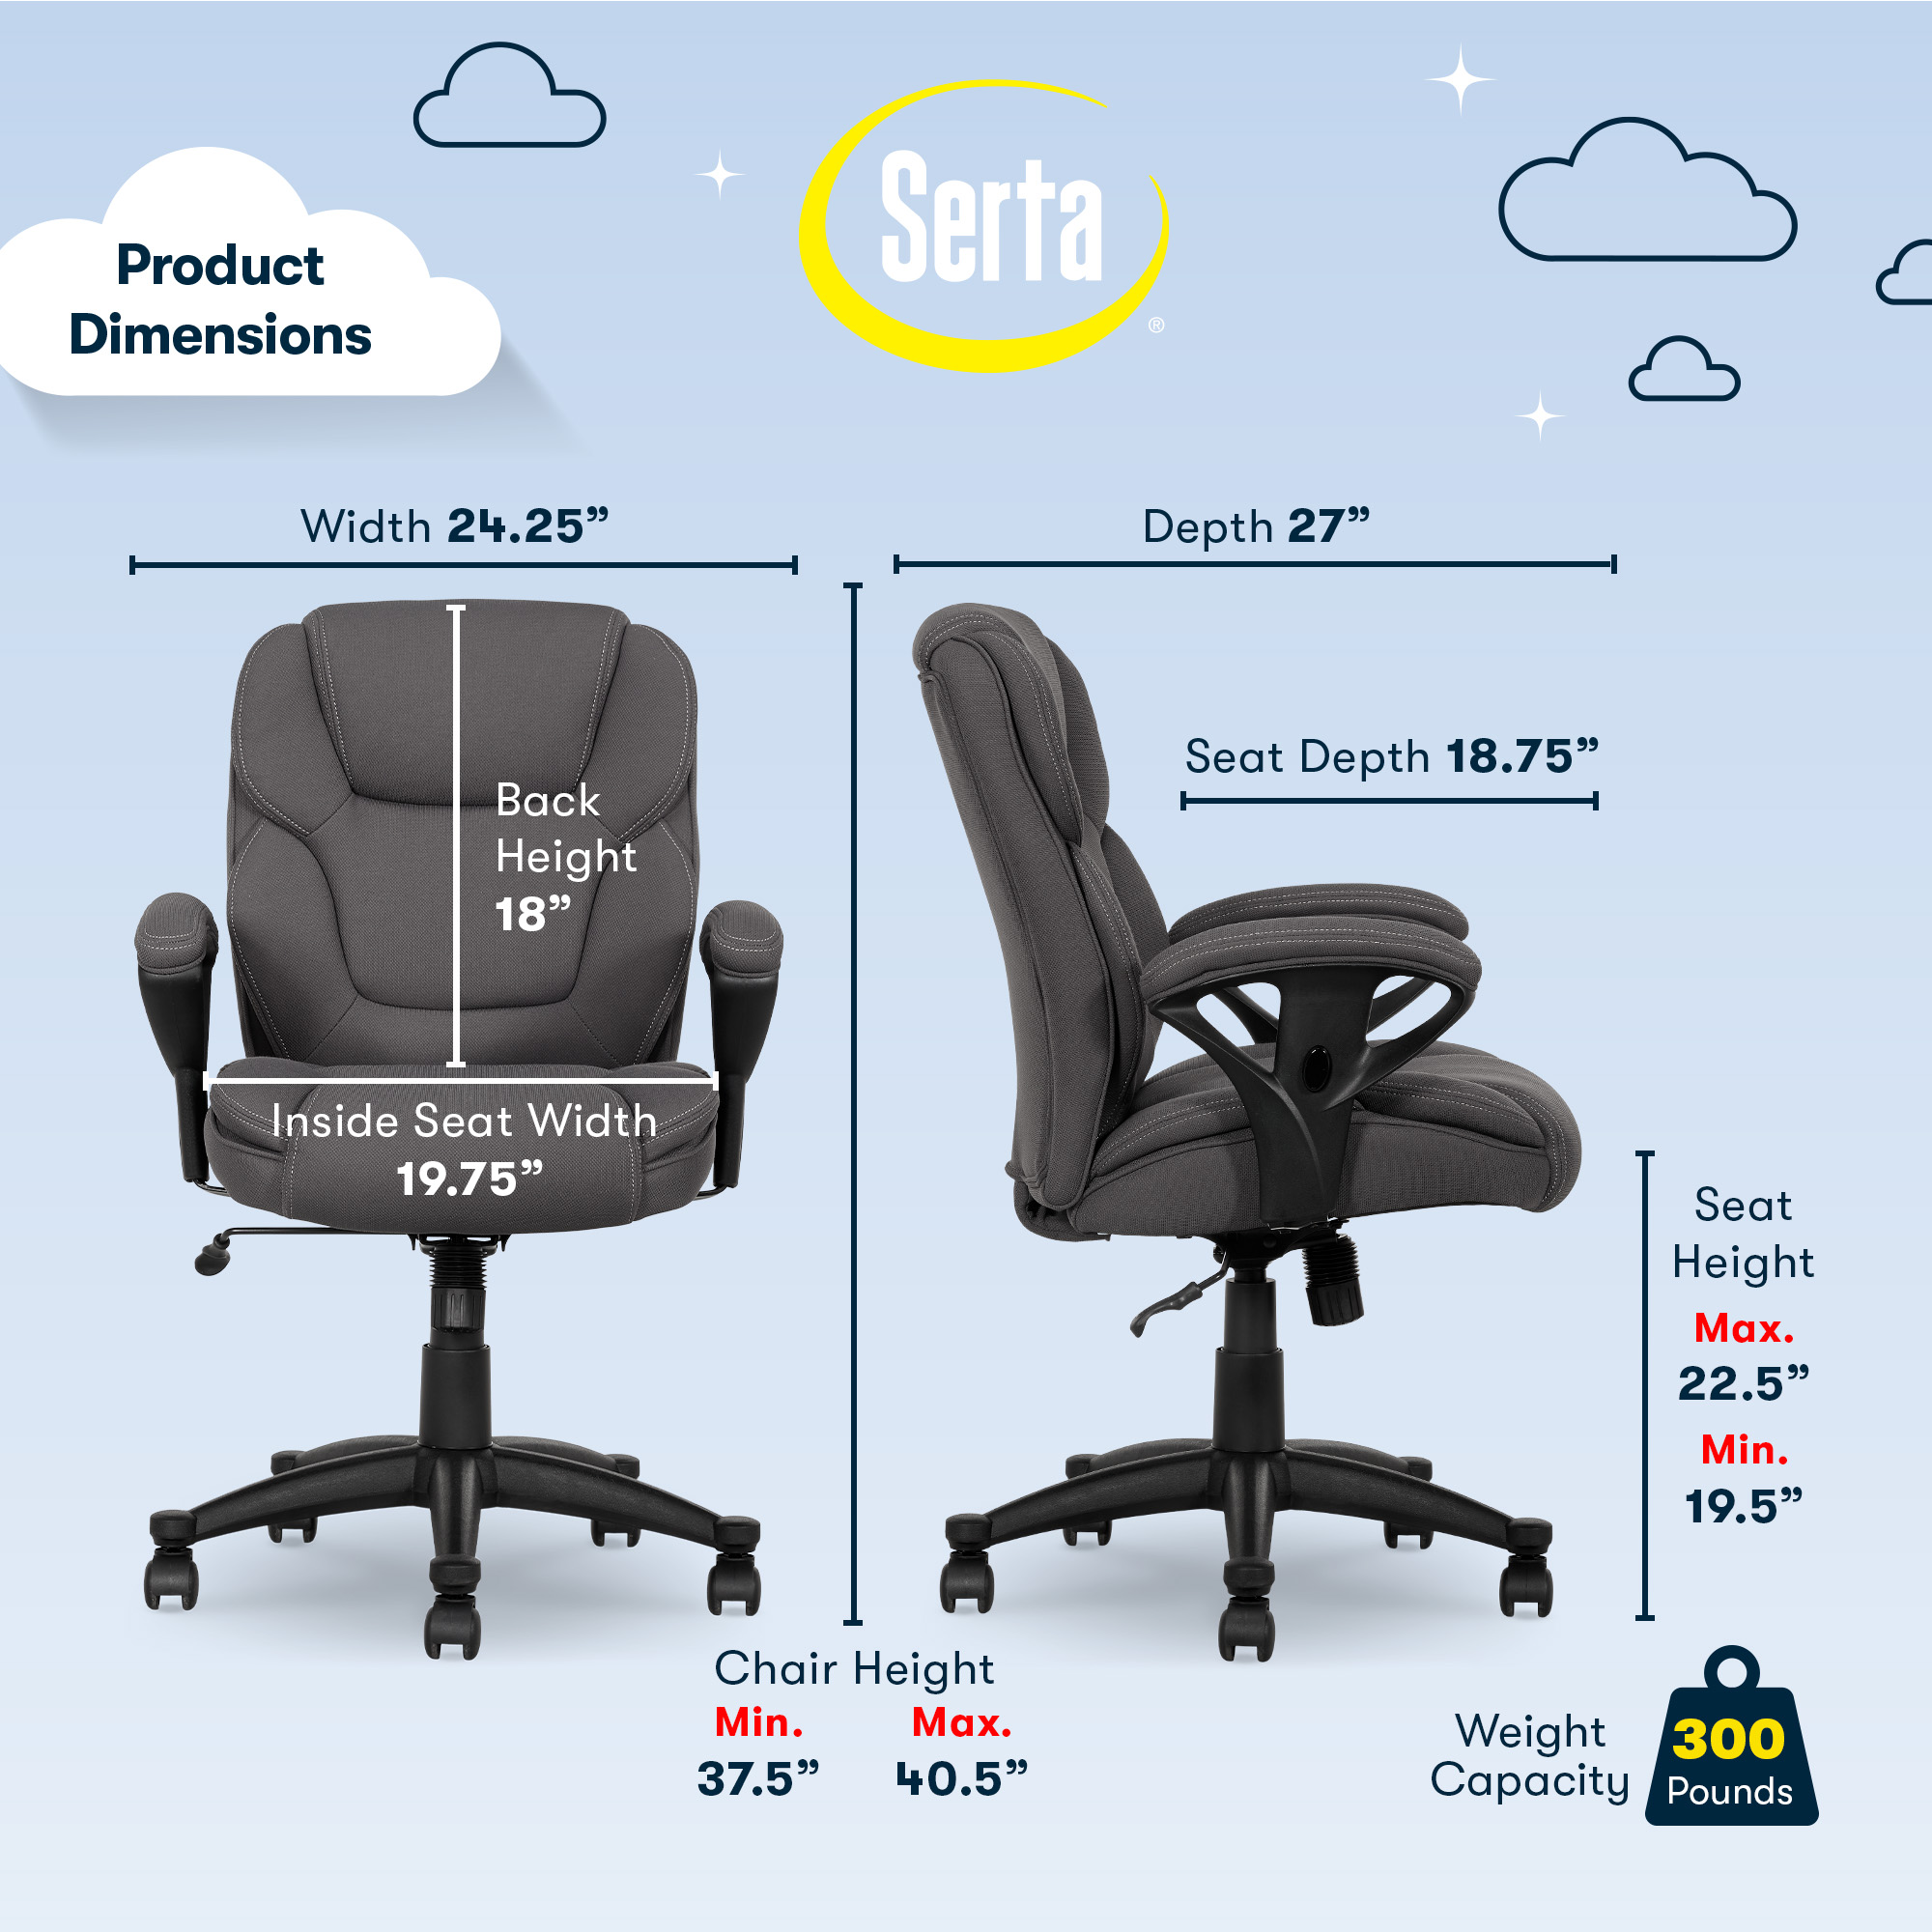 Serta Commercial Grade Task Office Chair, Supports up to 300 lbs., Dark Gray - image 3 of 15